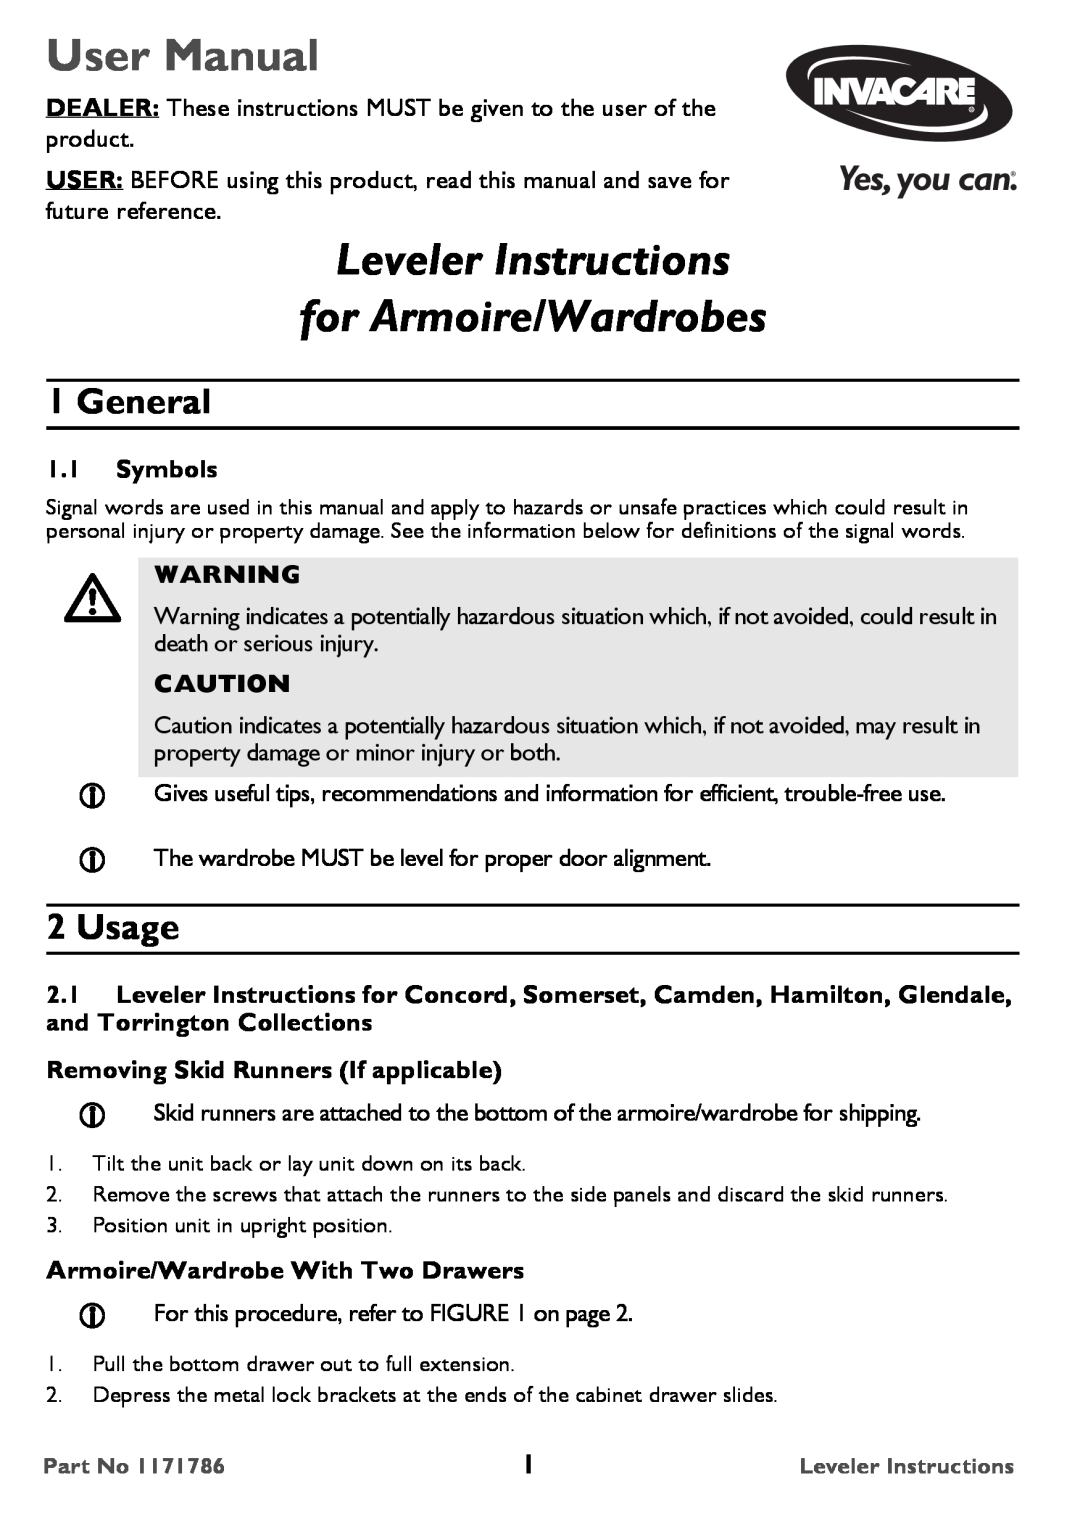 Invacare 1171786 user manual 1.1Symbols, Cautionwarning, Removing Skid Runners If applicable, General, Usage 